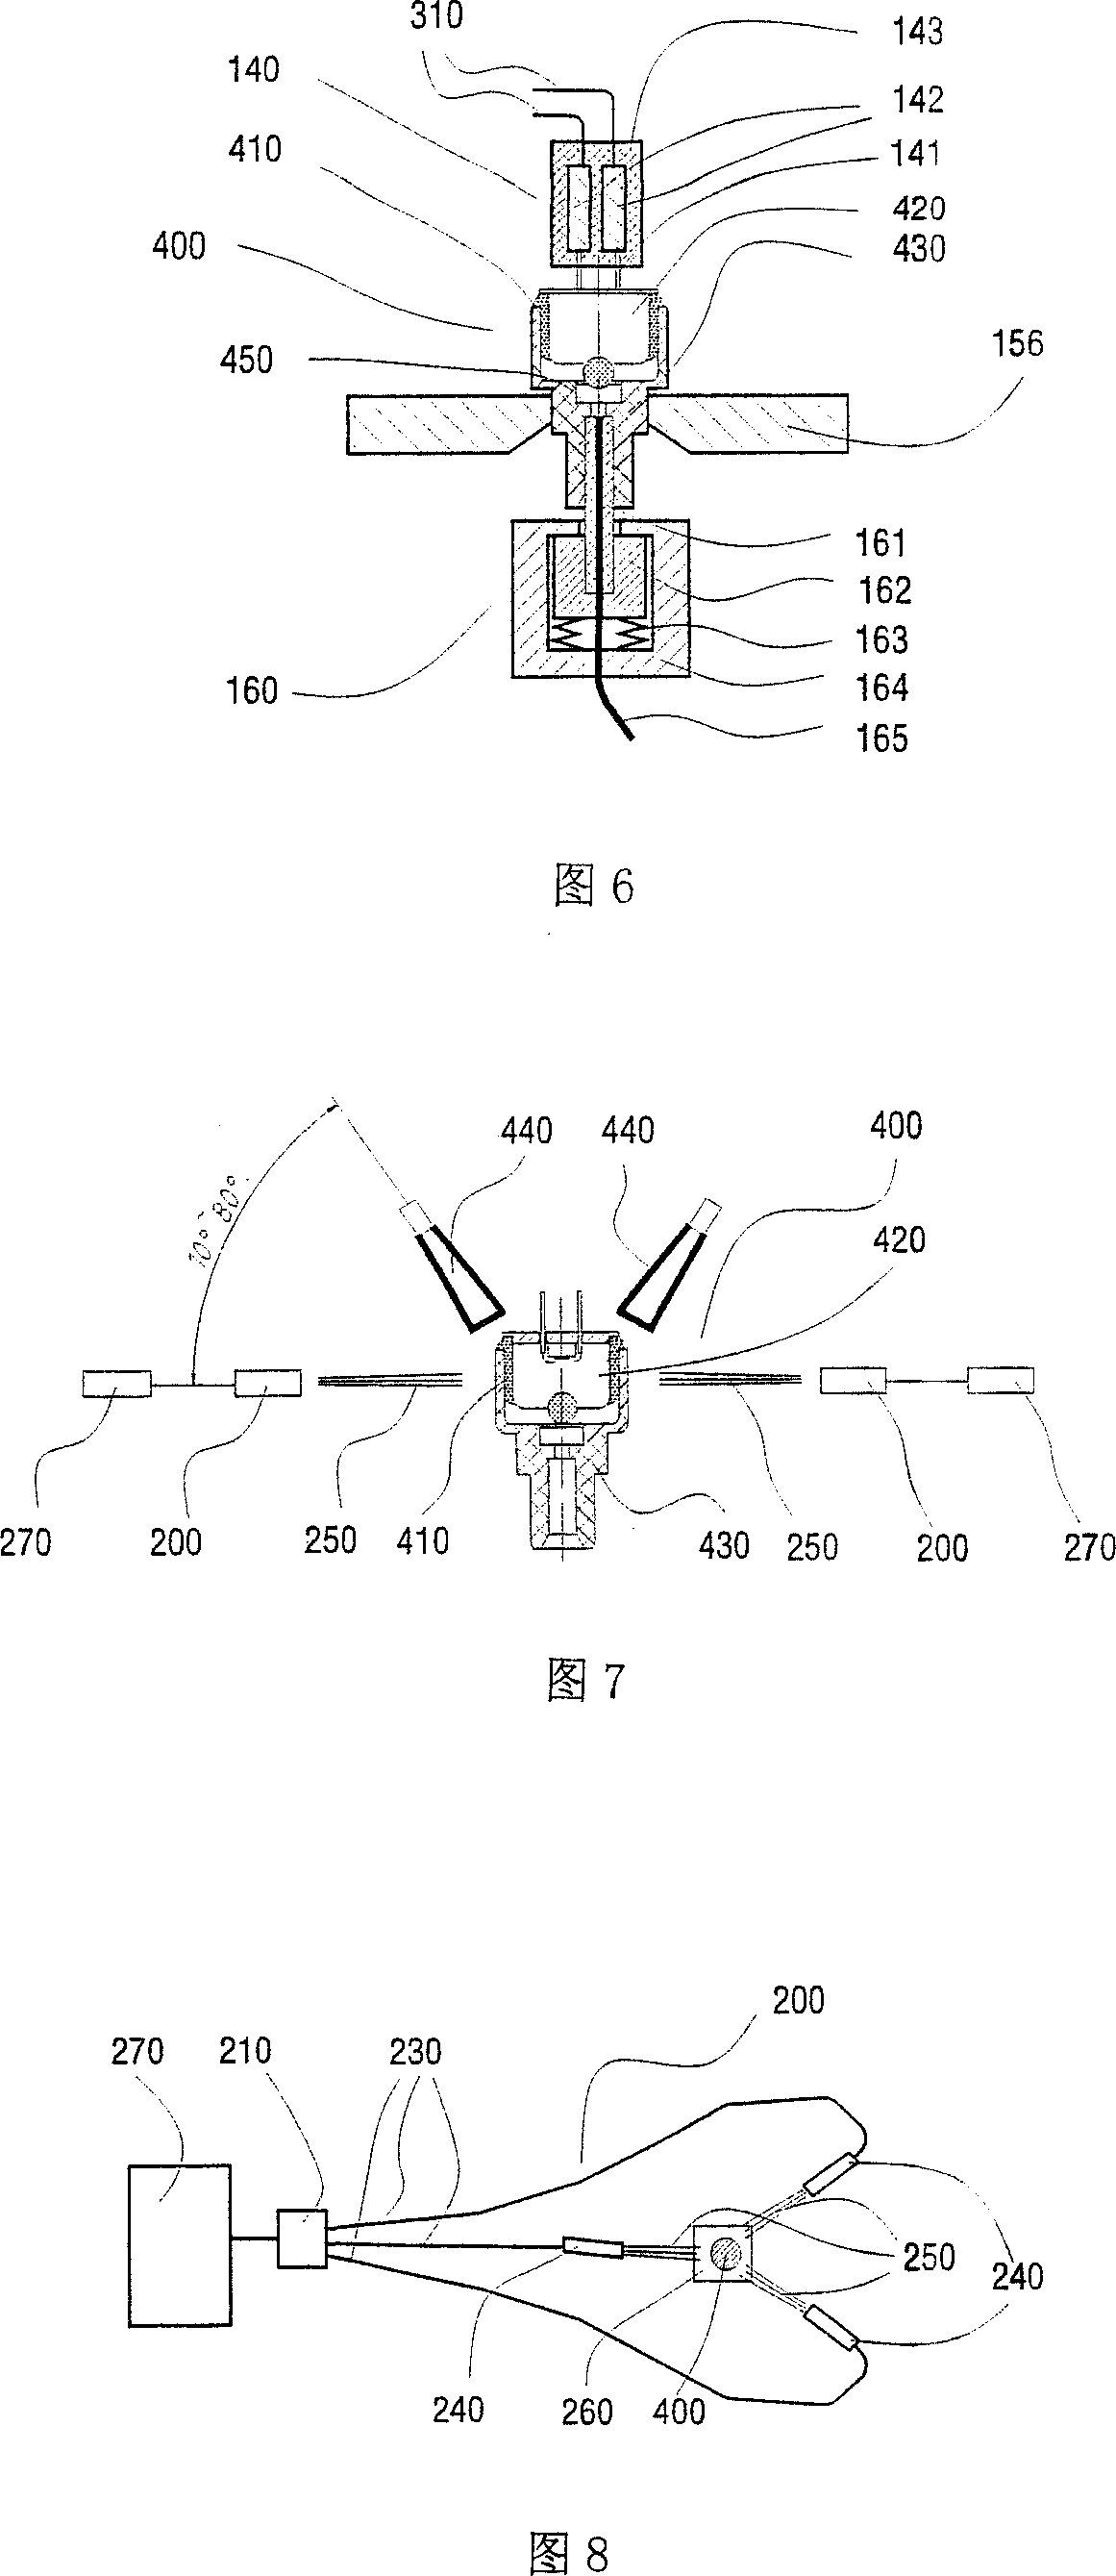 Device for curing packaging optoelectronic conversion modules based on coherent optical radiation and method thereof